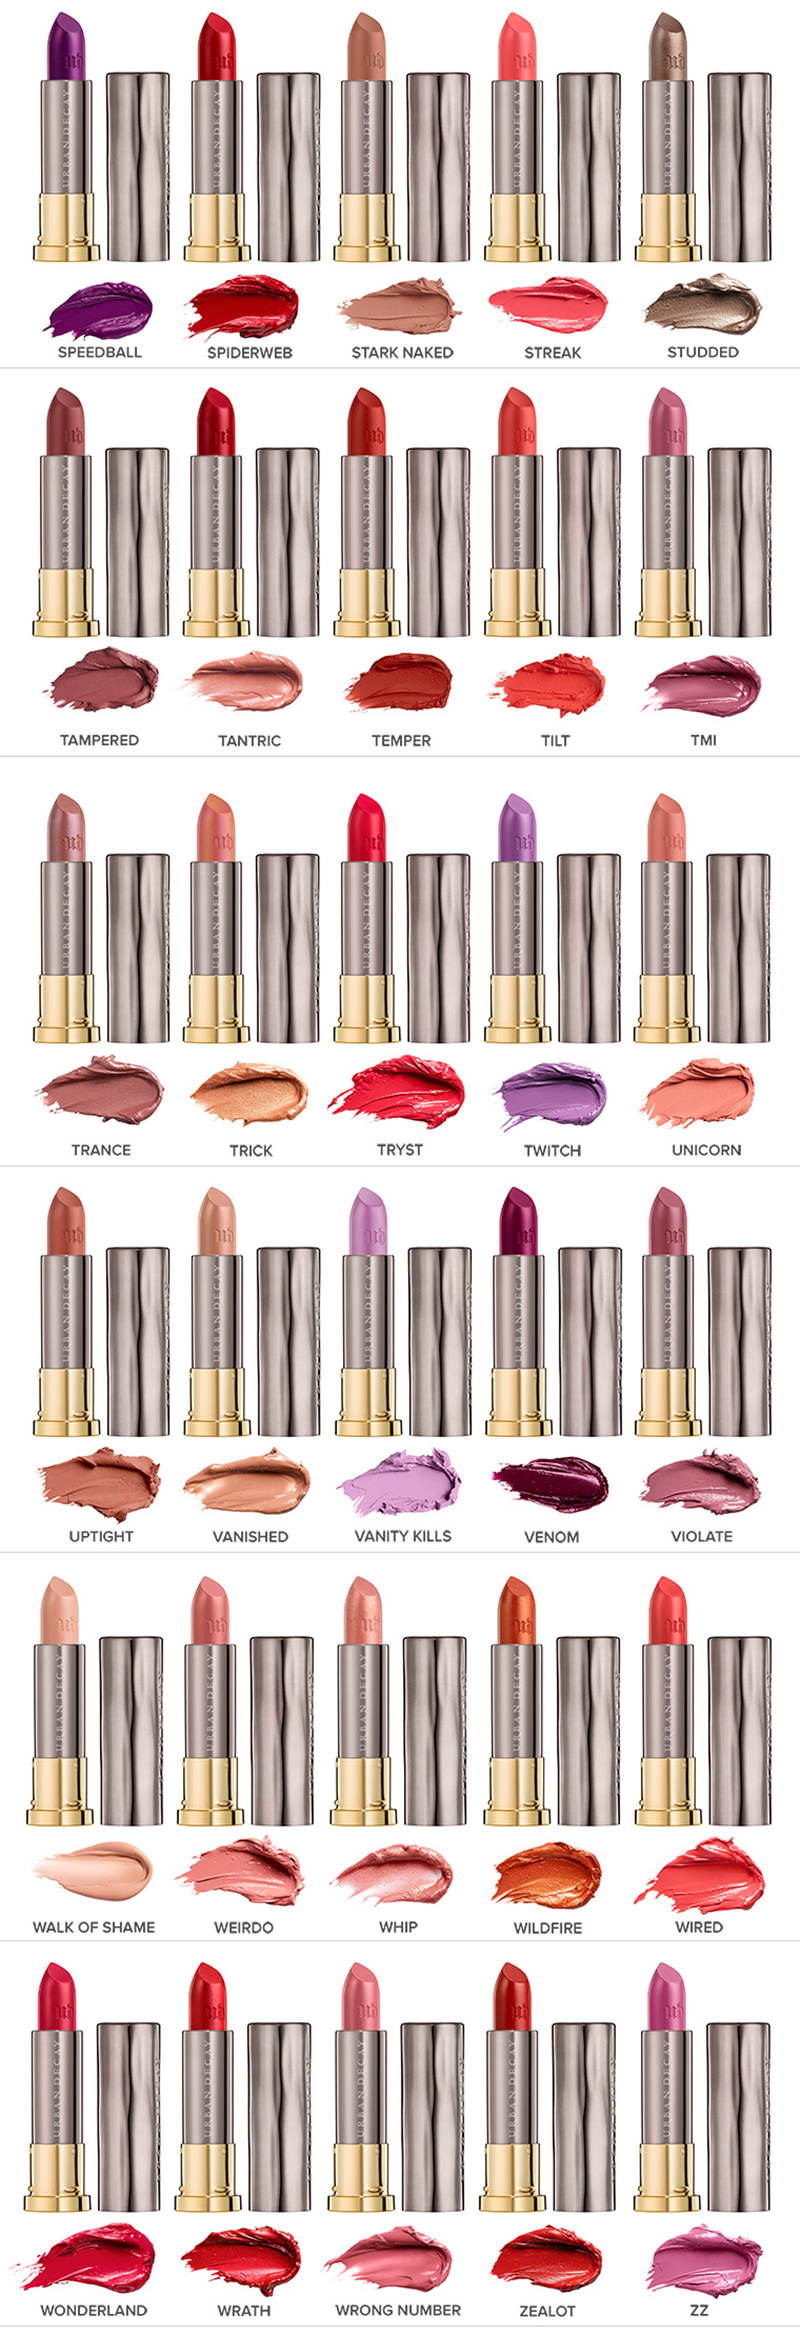 stylelab-beauty-blog-urban-decay-vice-lipstick-collection-5